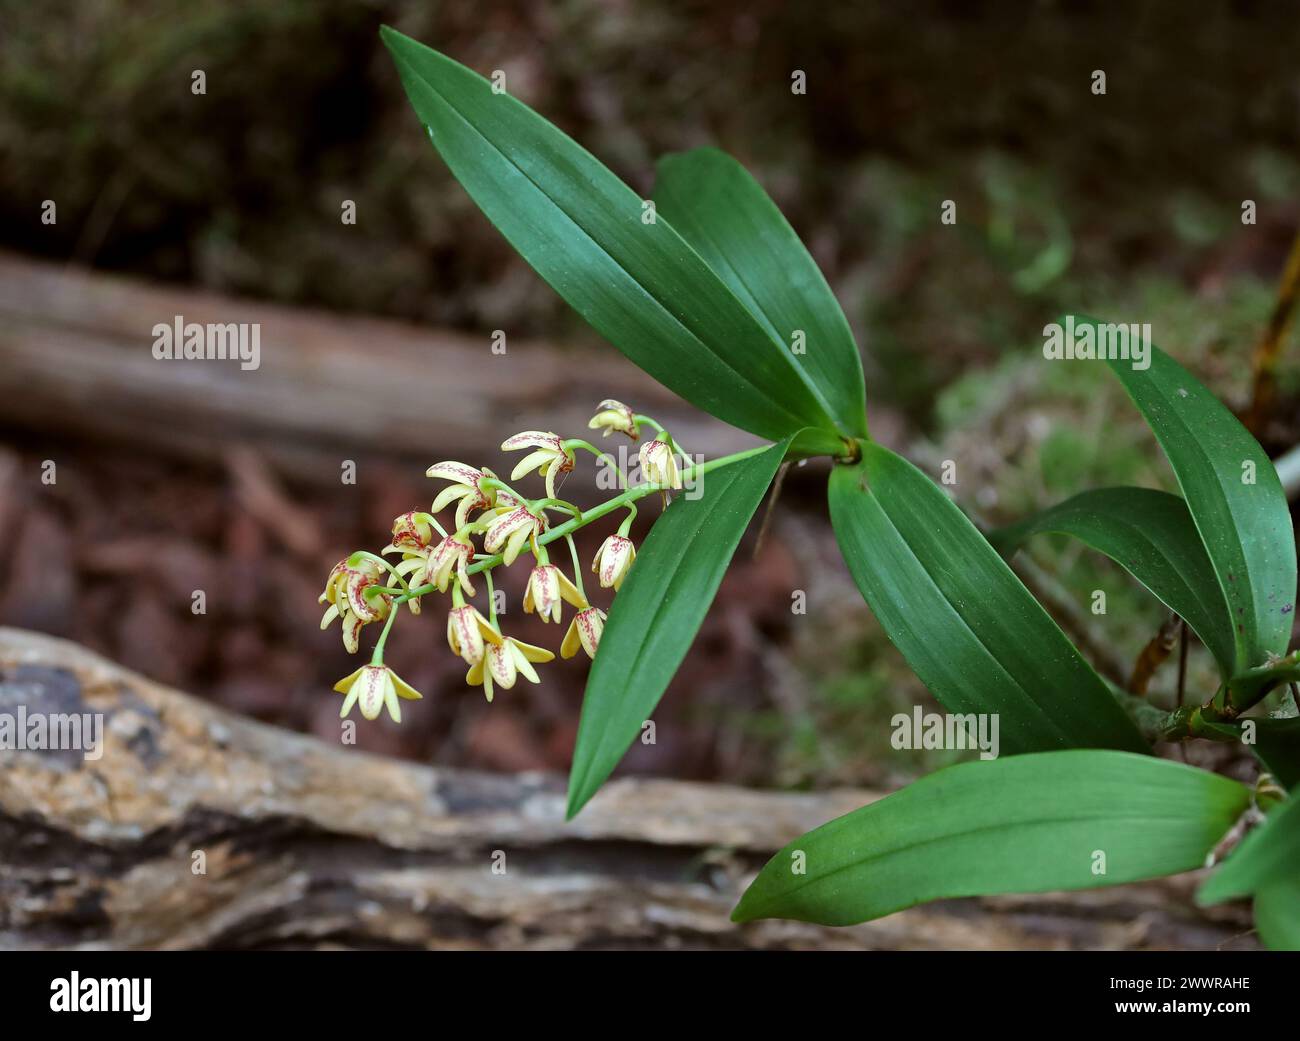 Gefleckte Cane Orchid oder gelbe Cane Orchid, Dendrobium gracilicaule, Epidendroideae, Orchidaceae. Stockfoto